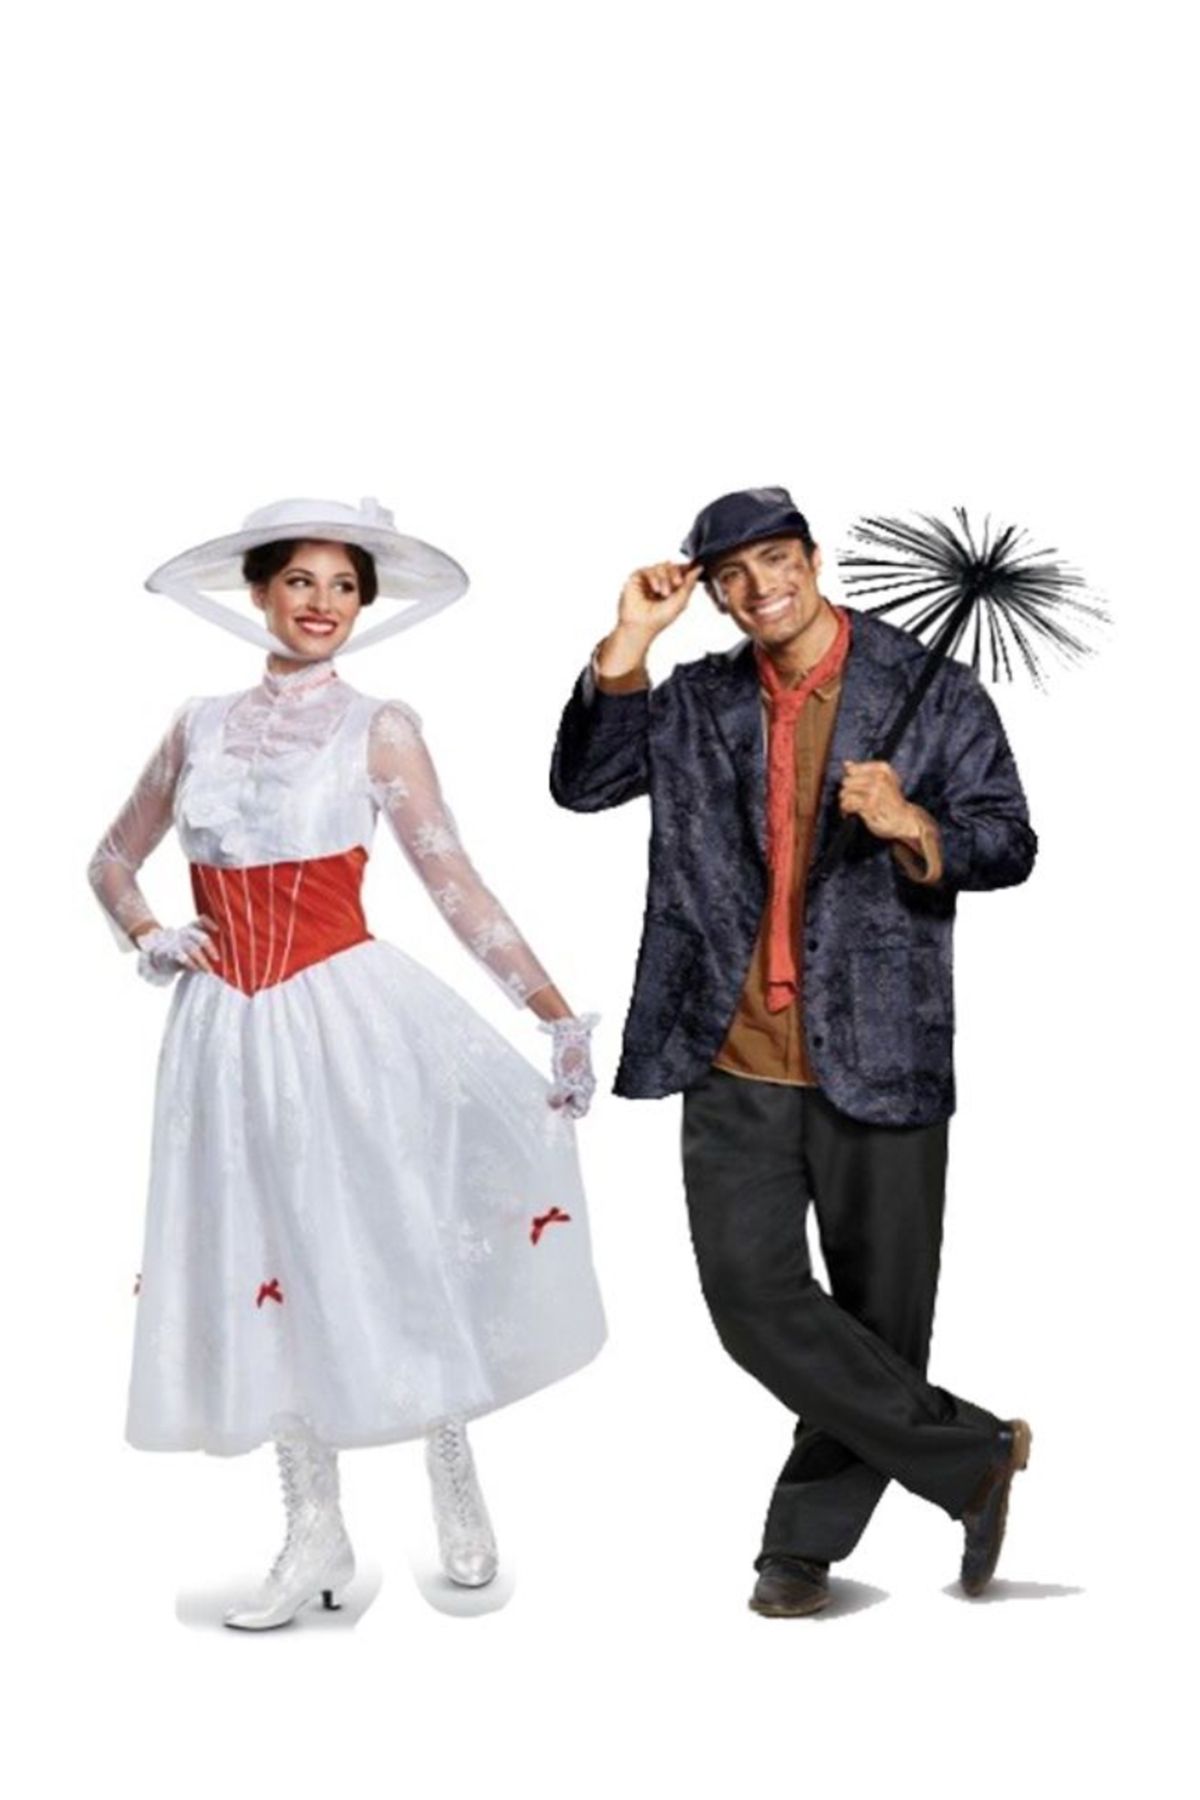 Young Couple Play Dress Up